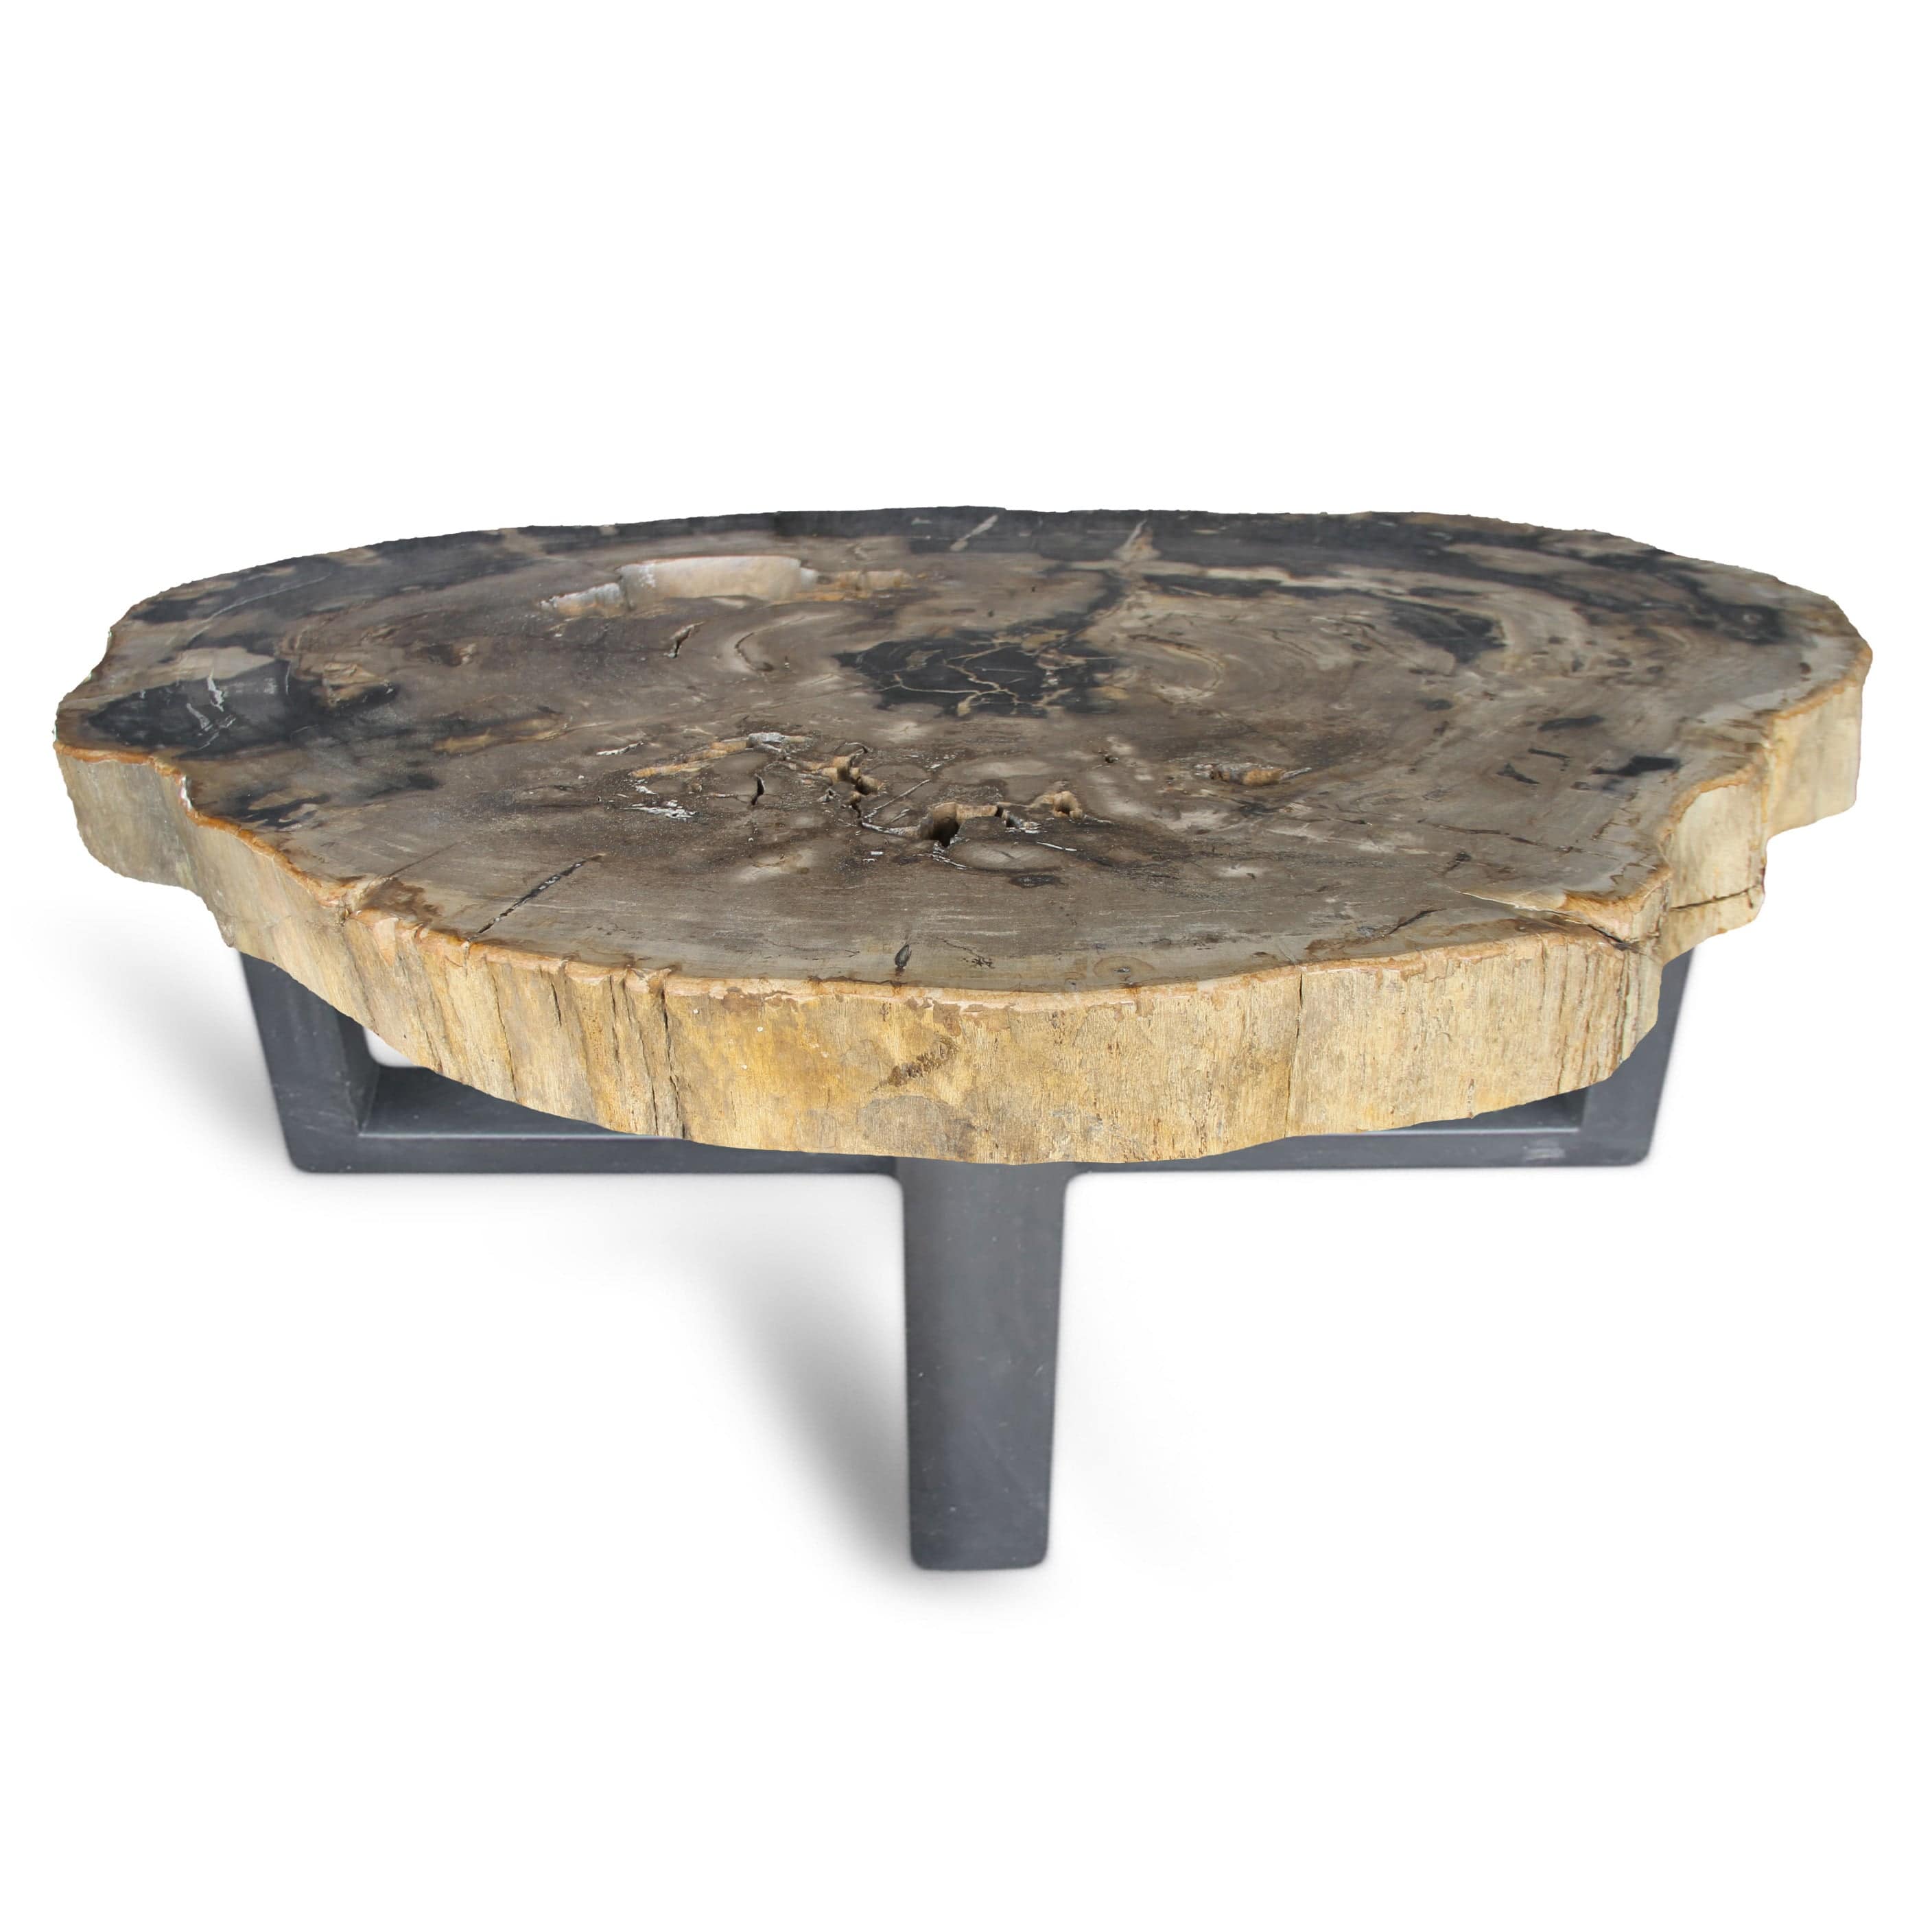 Kalifano Petrified Wood Petrified Wood Round Slab Coffee Table from Indonesia - 48" / 343 lbs PWT12600.001